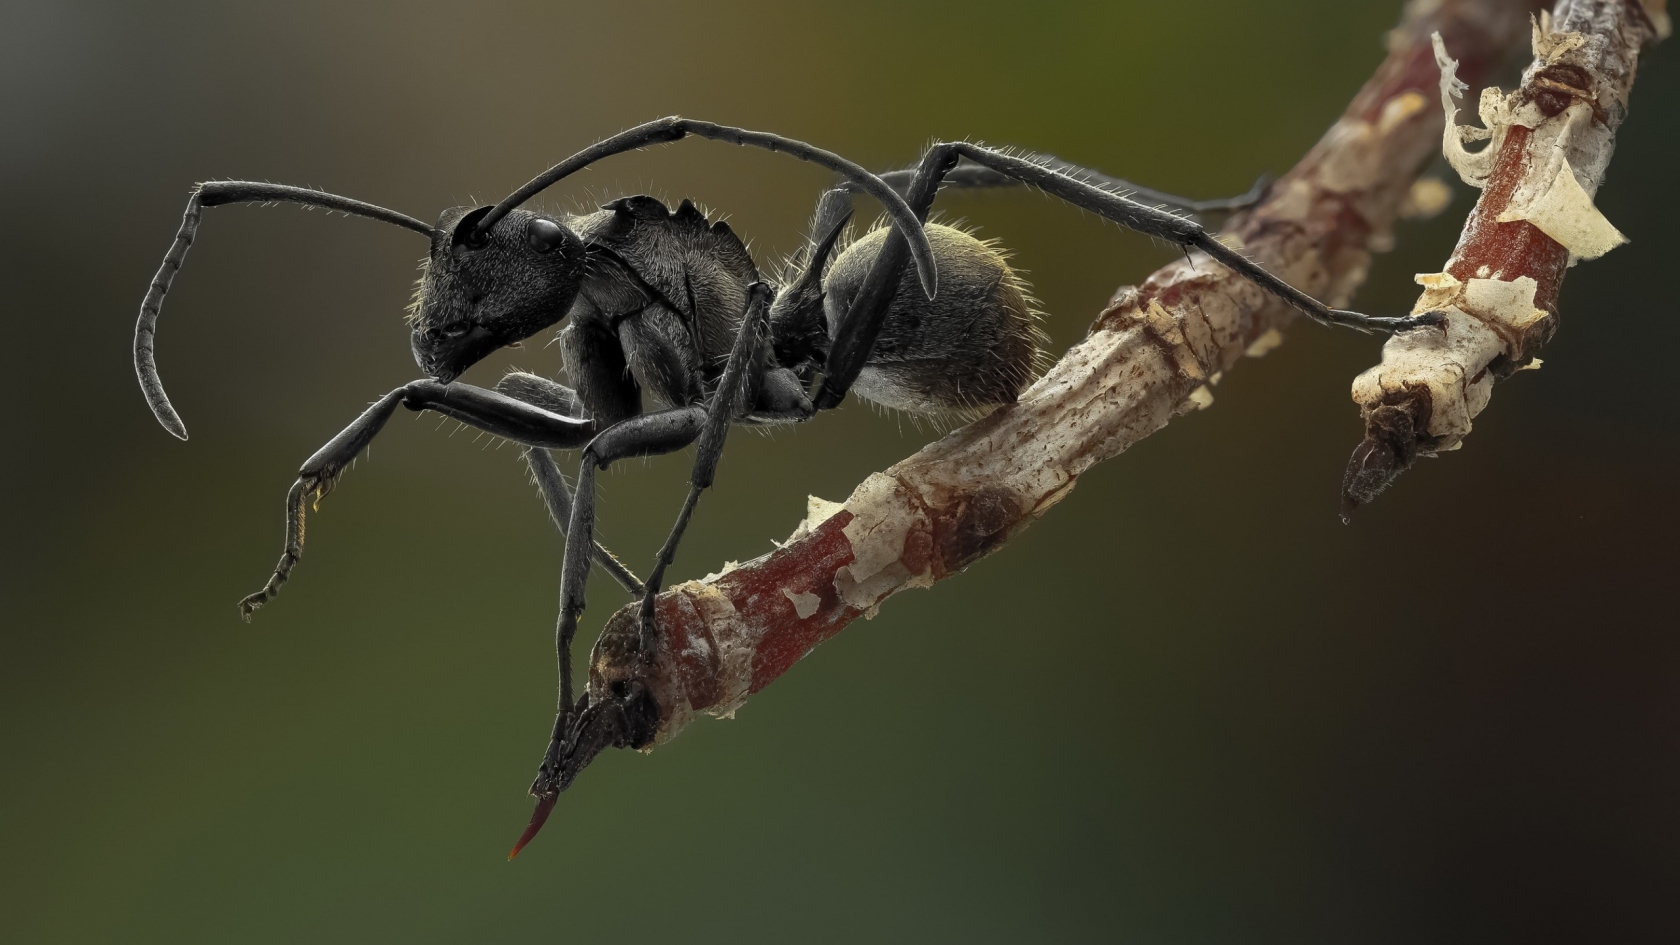 Ant Macro Photography for 1680 x 945 HDTV resolution